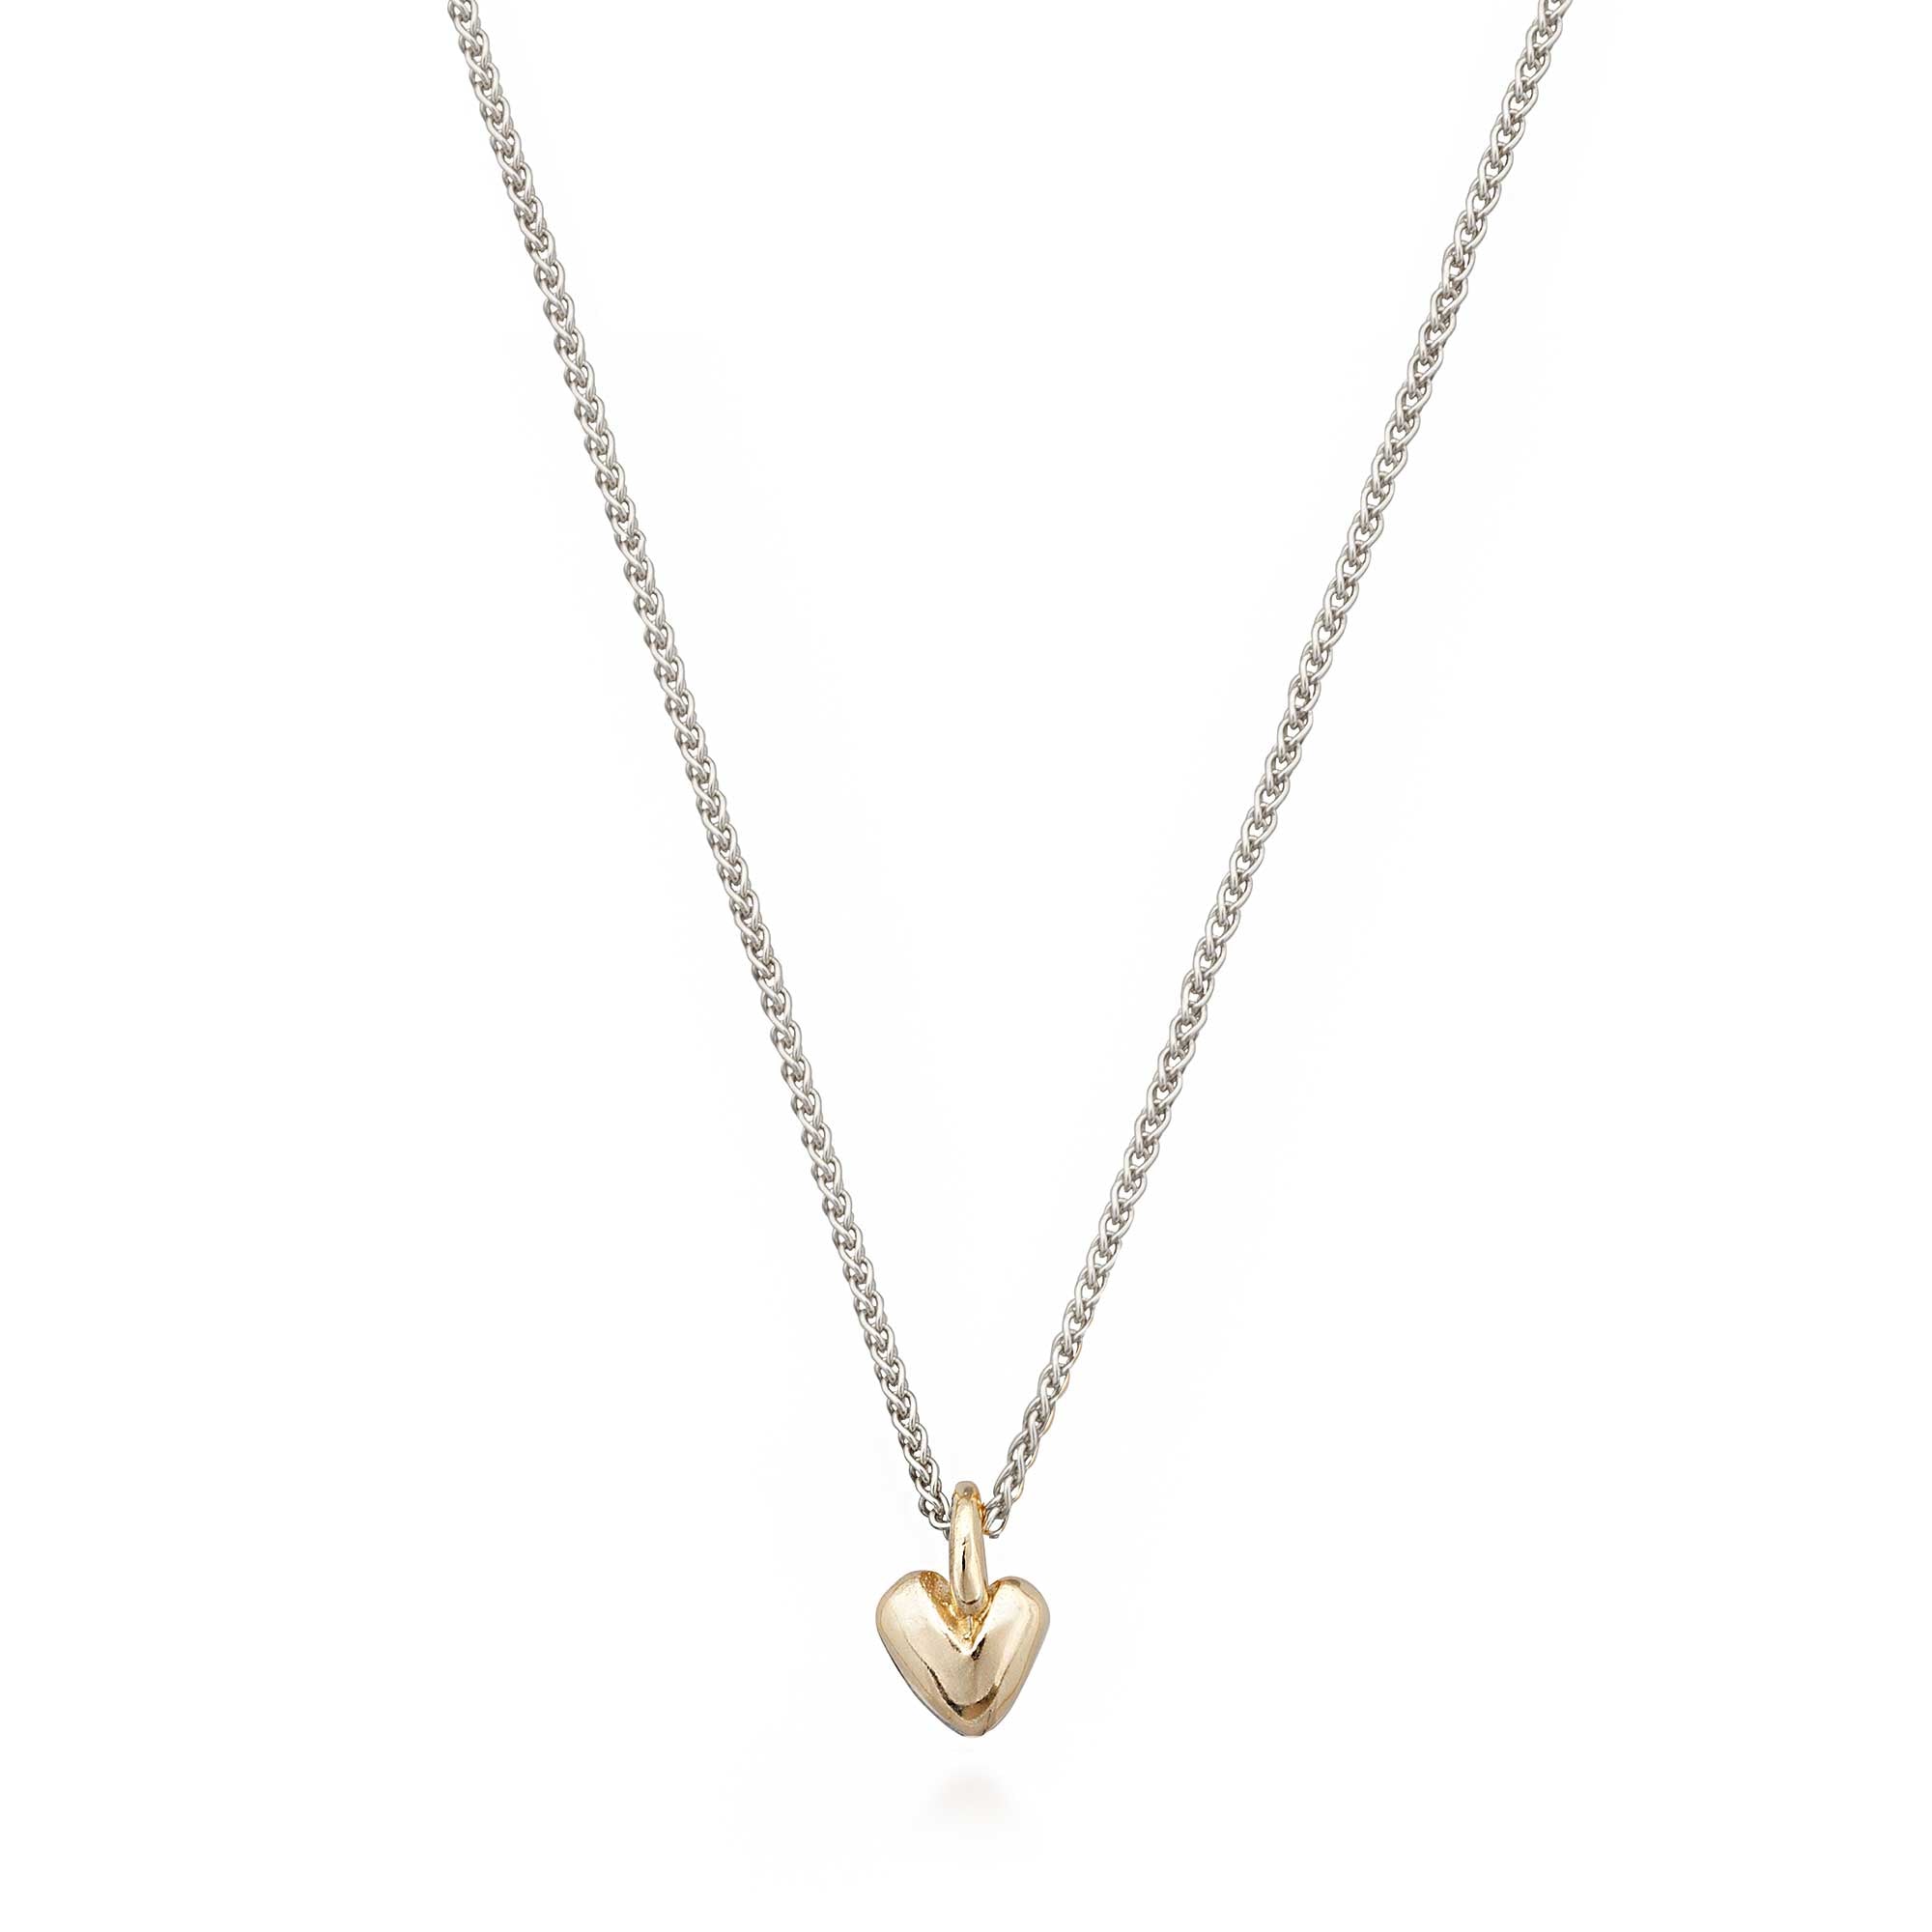 Solid silver & gold recycled heart pendant Scarlett Jewellery UK Slow fashion trends